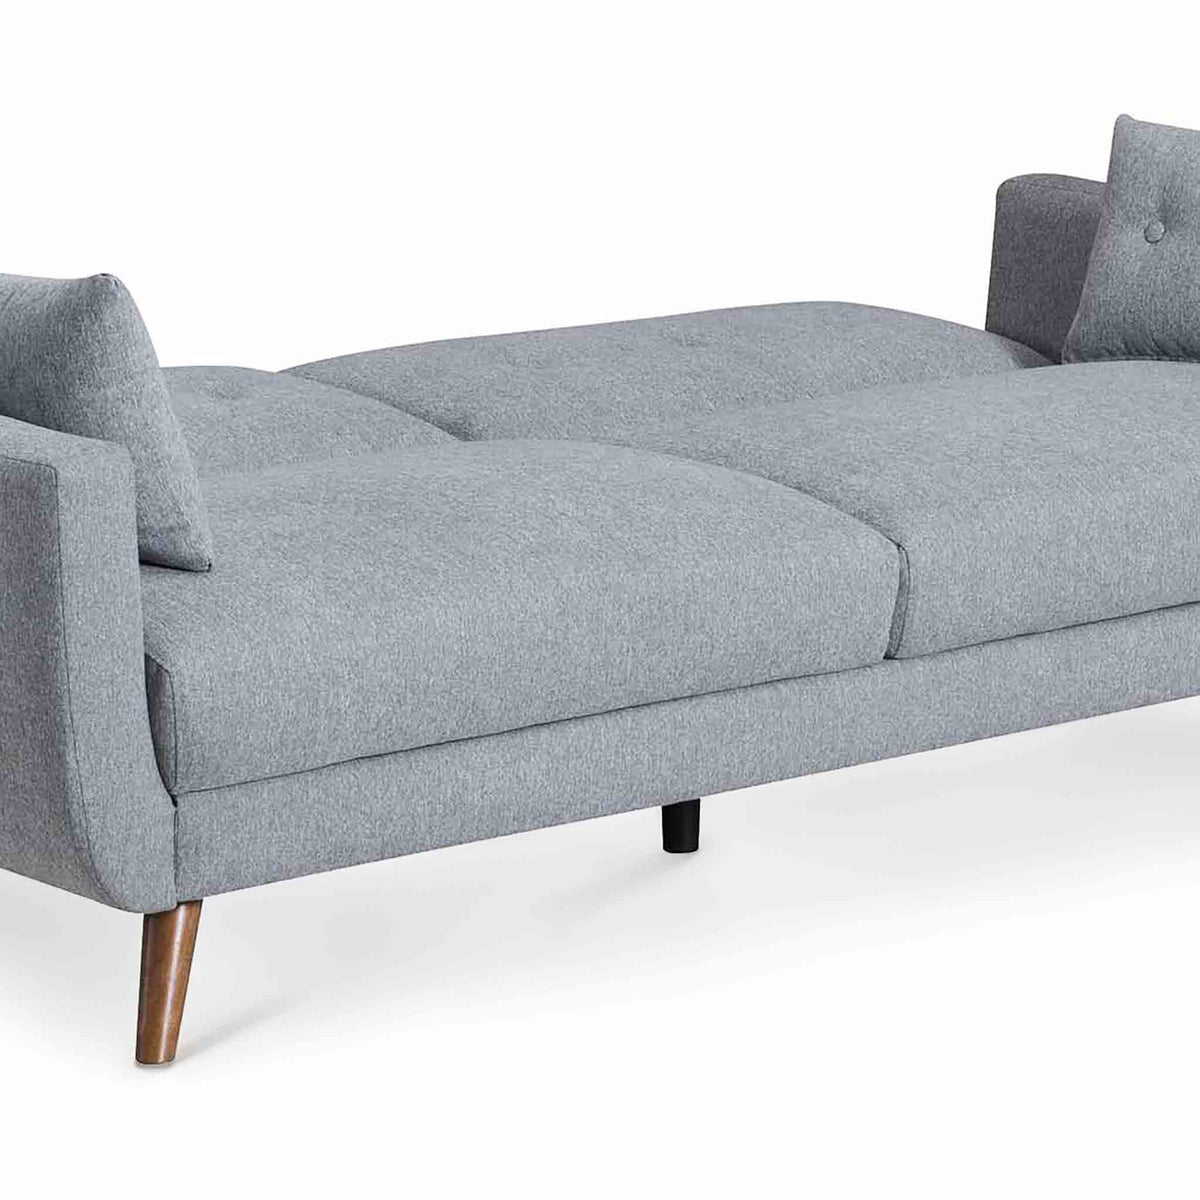 Trom Grey 3 Seater Sofa Bed - Close up of cushions when back rest is down